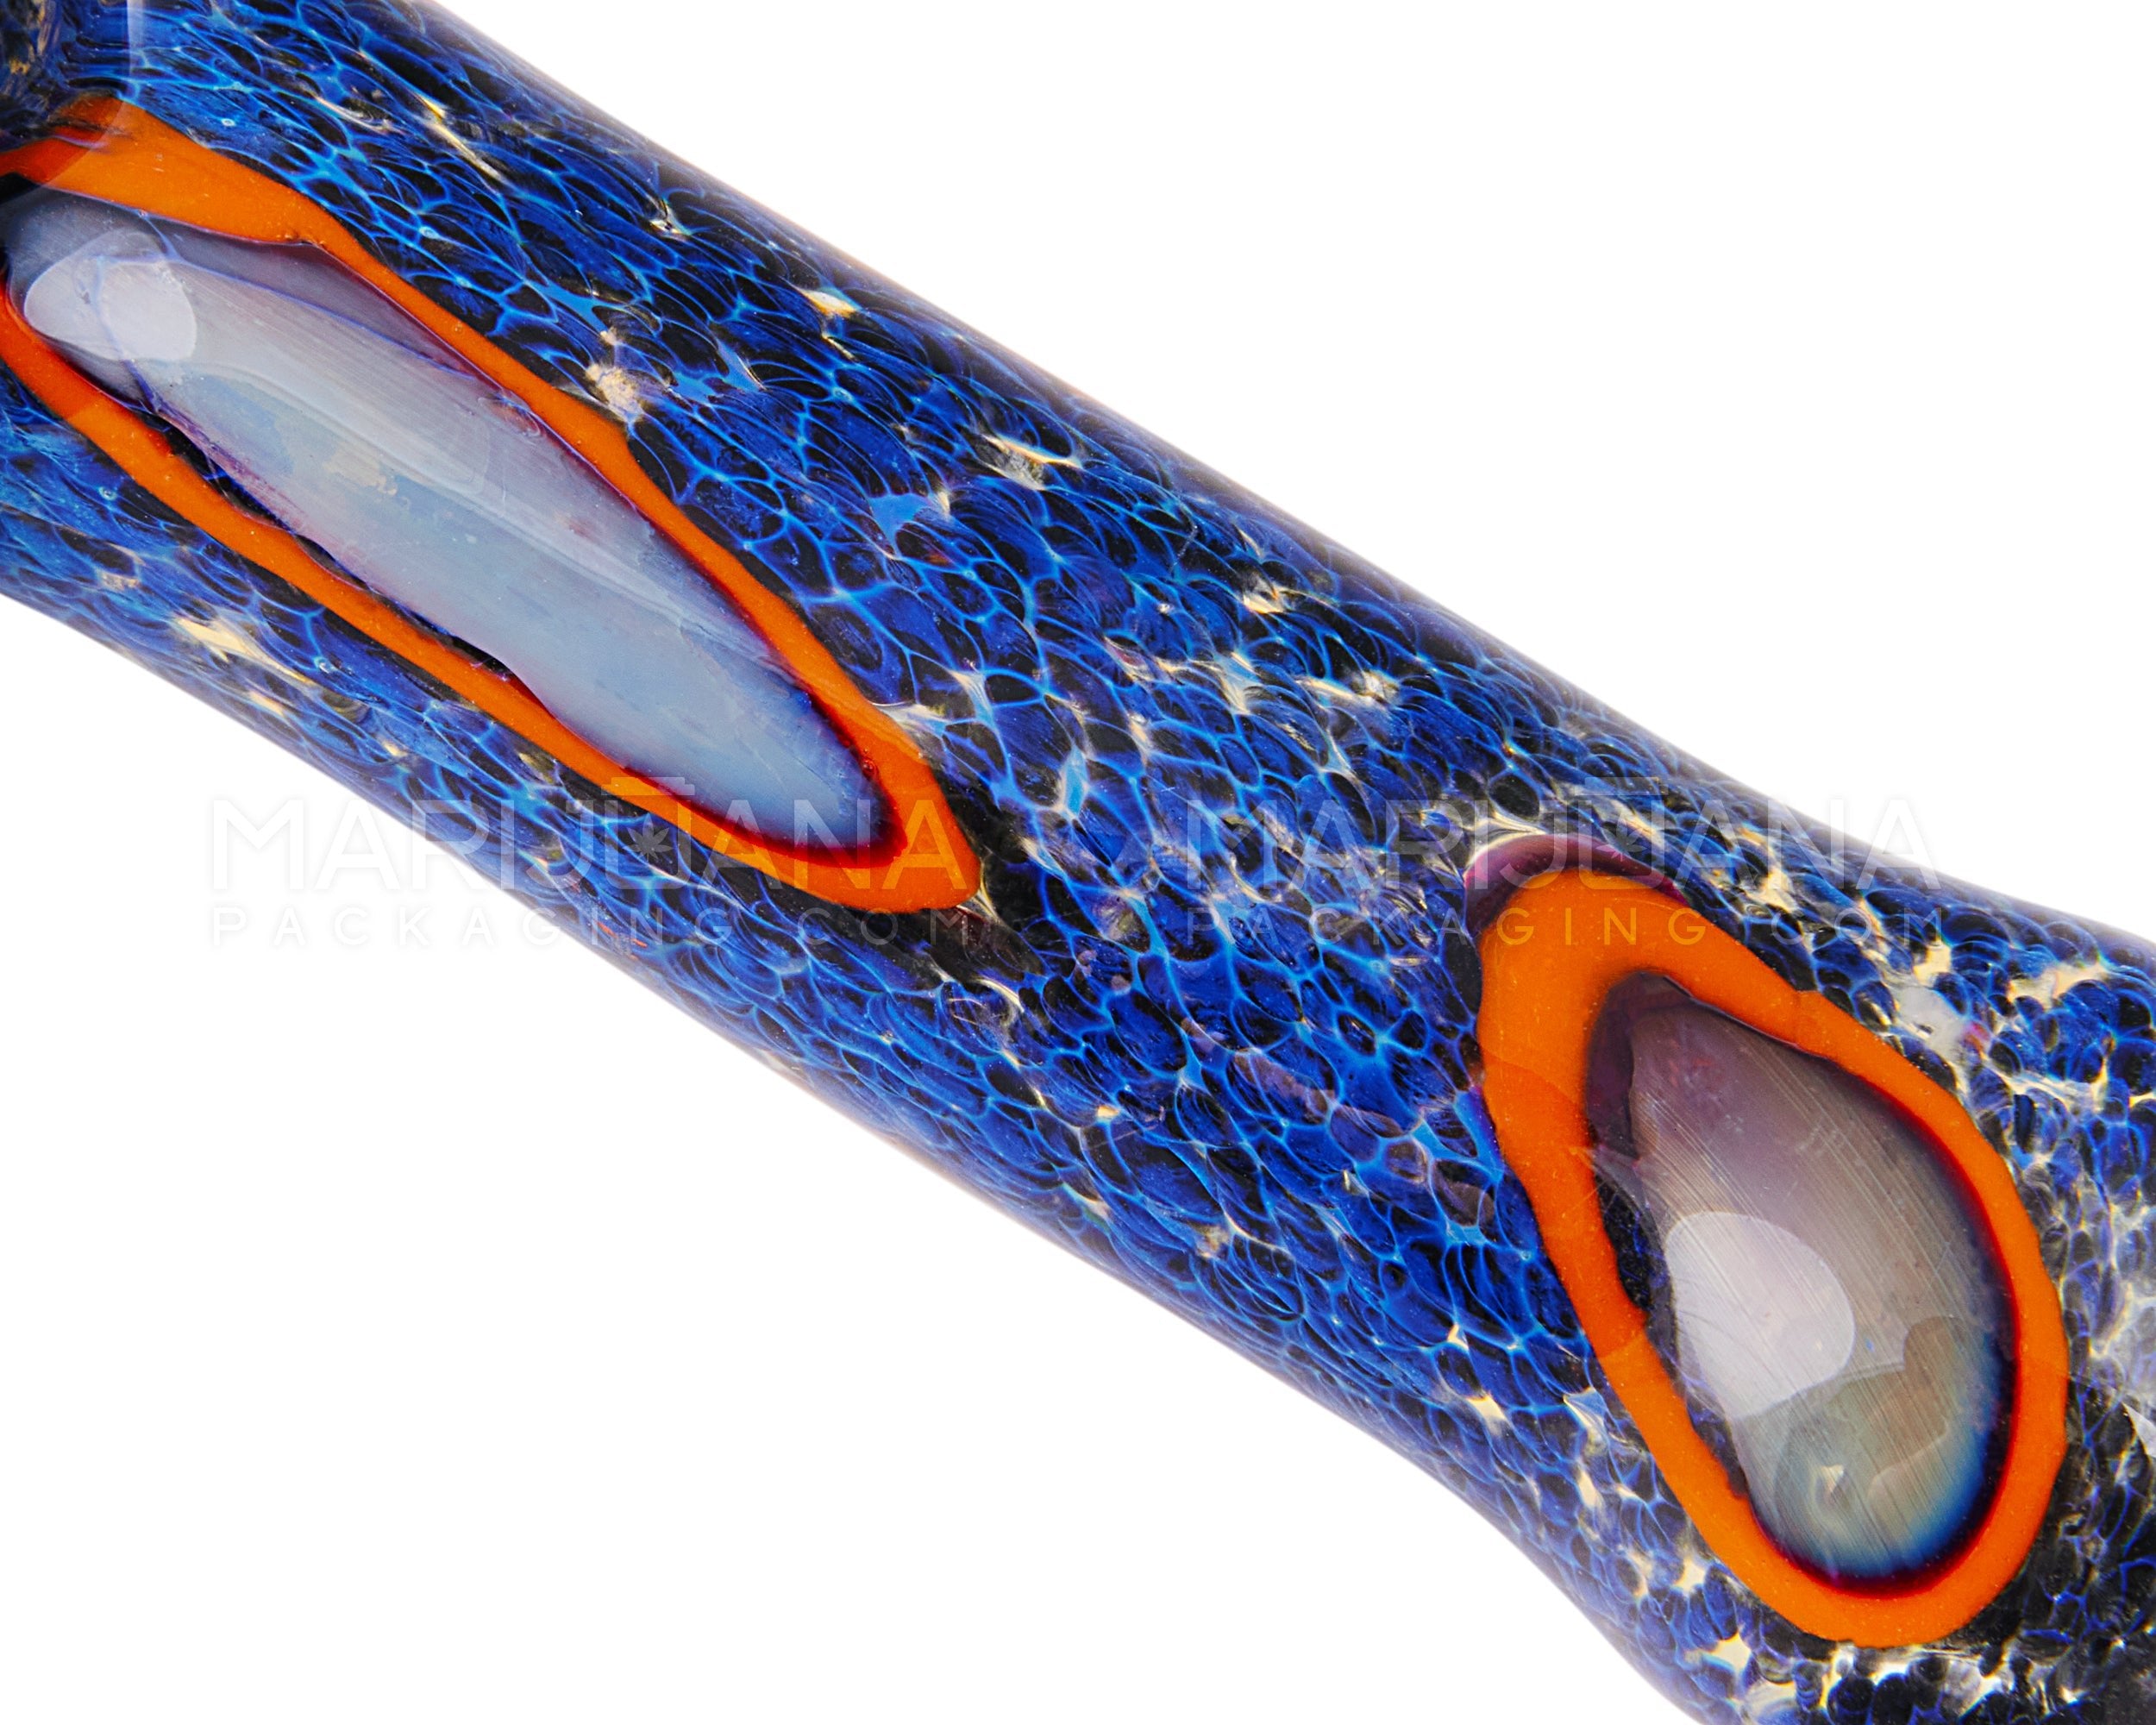 Frit & Fumed Swirl Spoon Hand Pipe | 5in Long - Glass - Assorted - 3